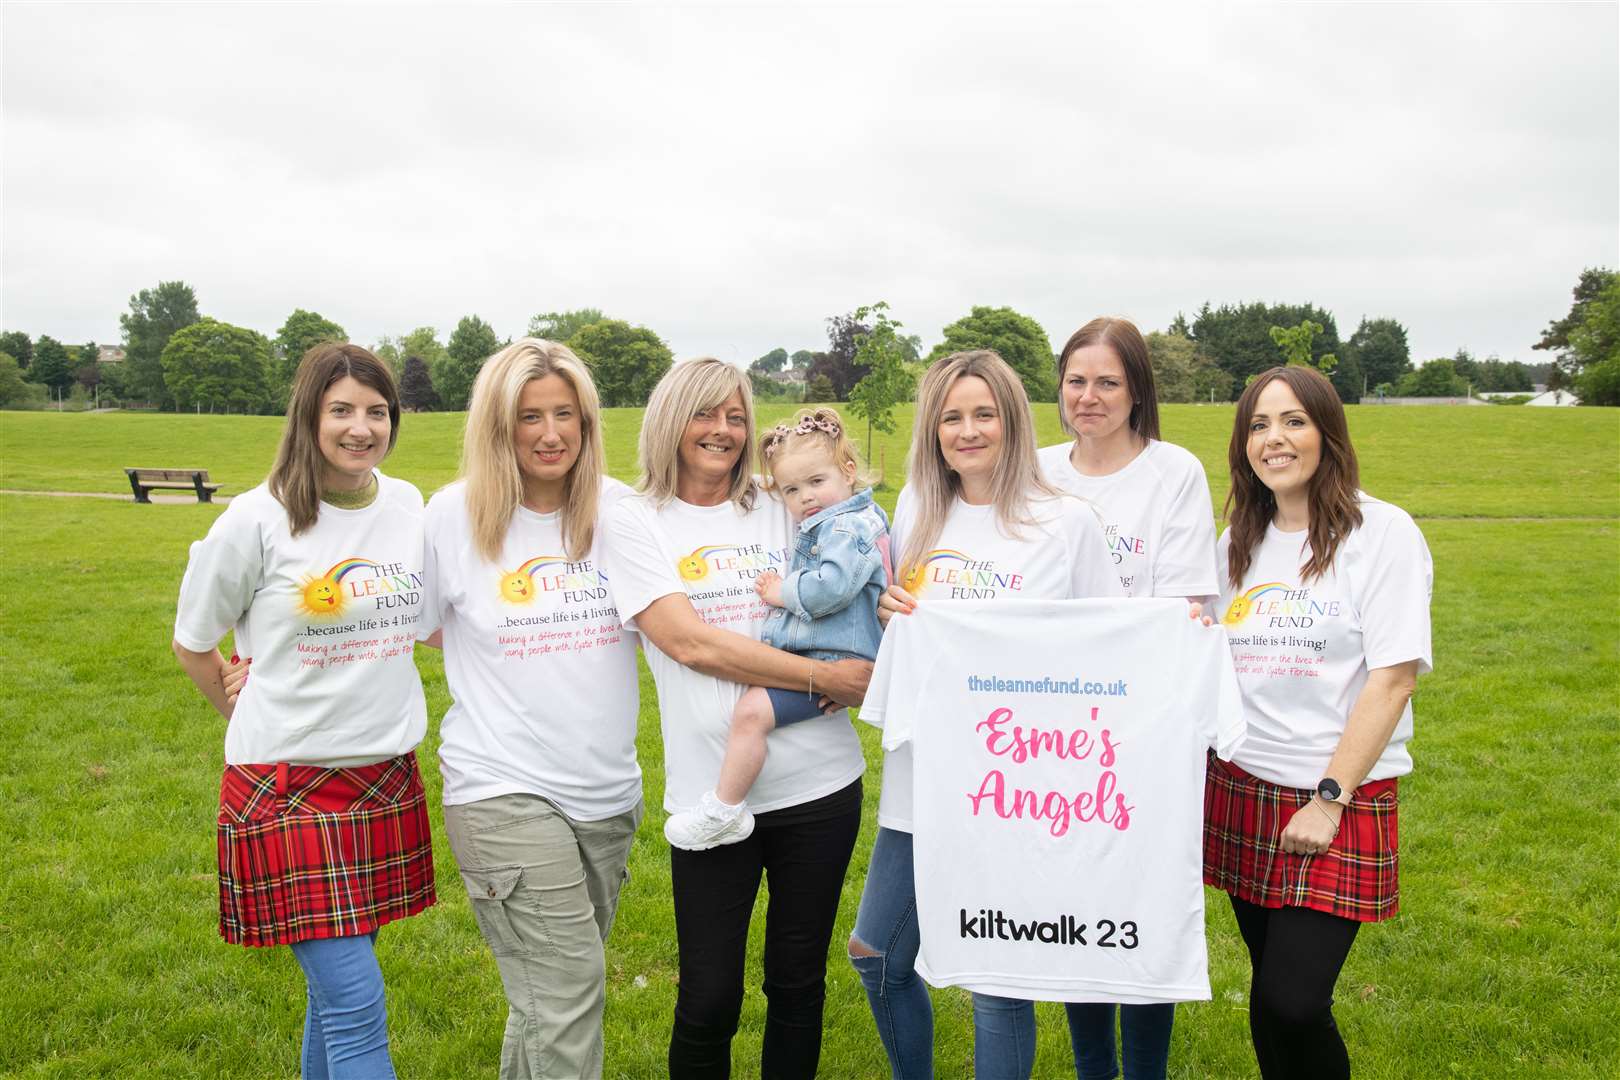 Esme's Angels, from left, Tamzin Virtue, Beth Little, Annette Thomson (holding Esme), Claire Thomson (mum), Gemma Finlayson and Kim McIntyre. Picture: Beth Taylor